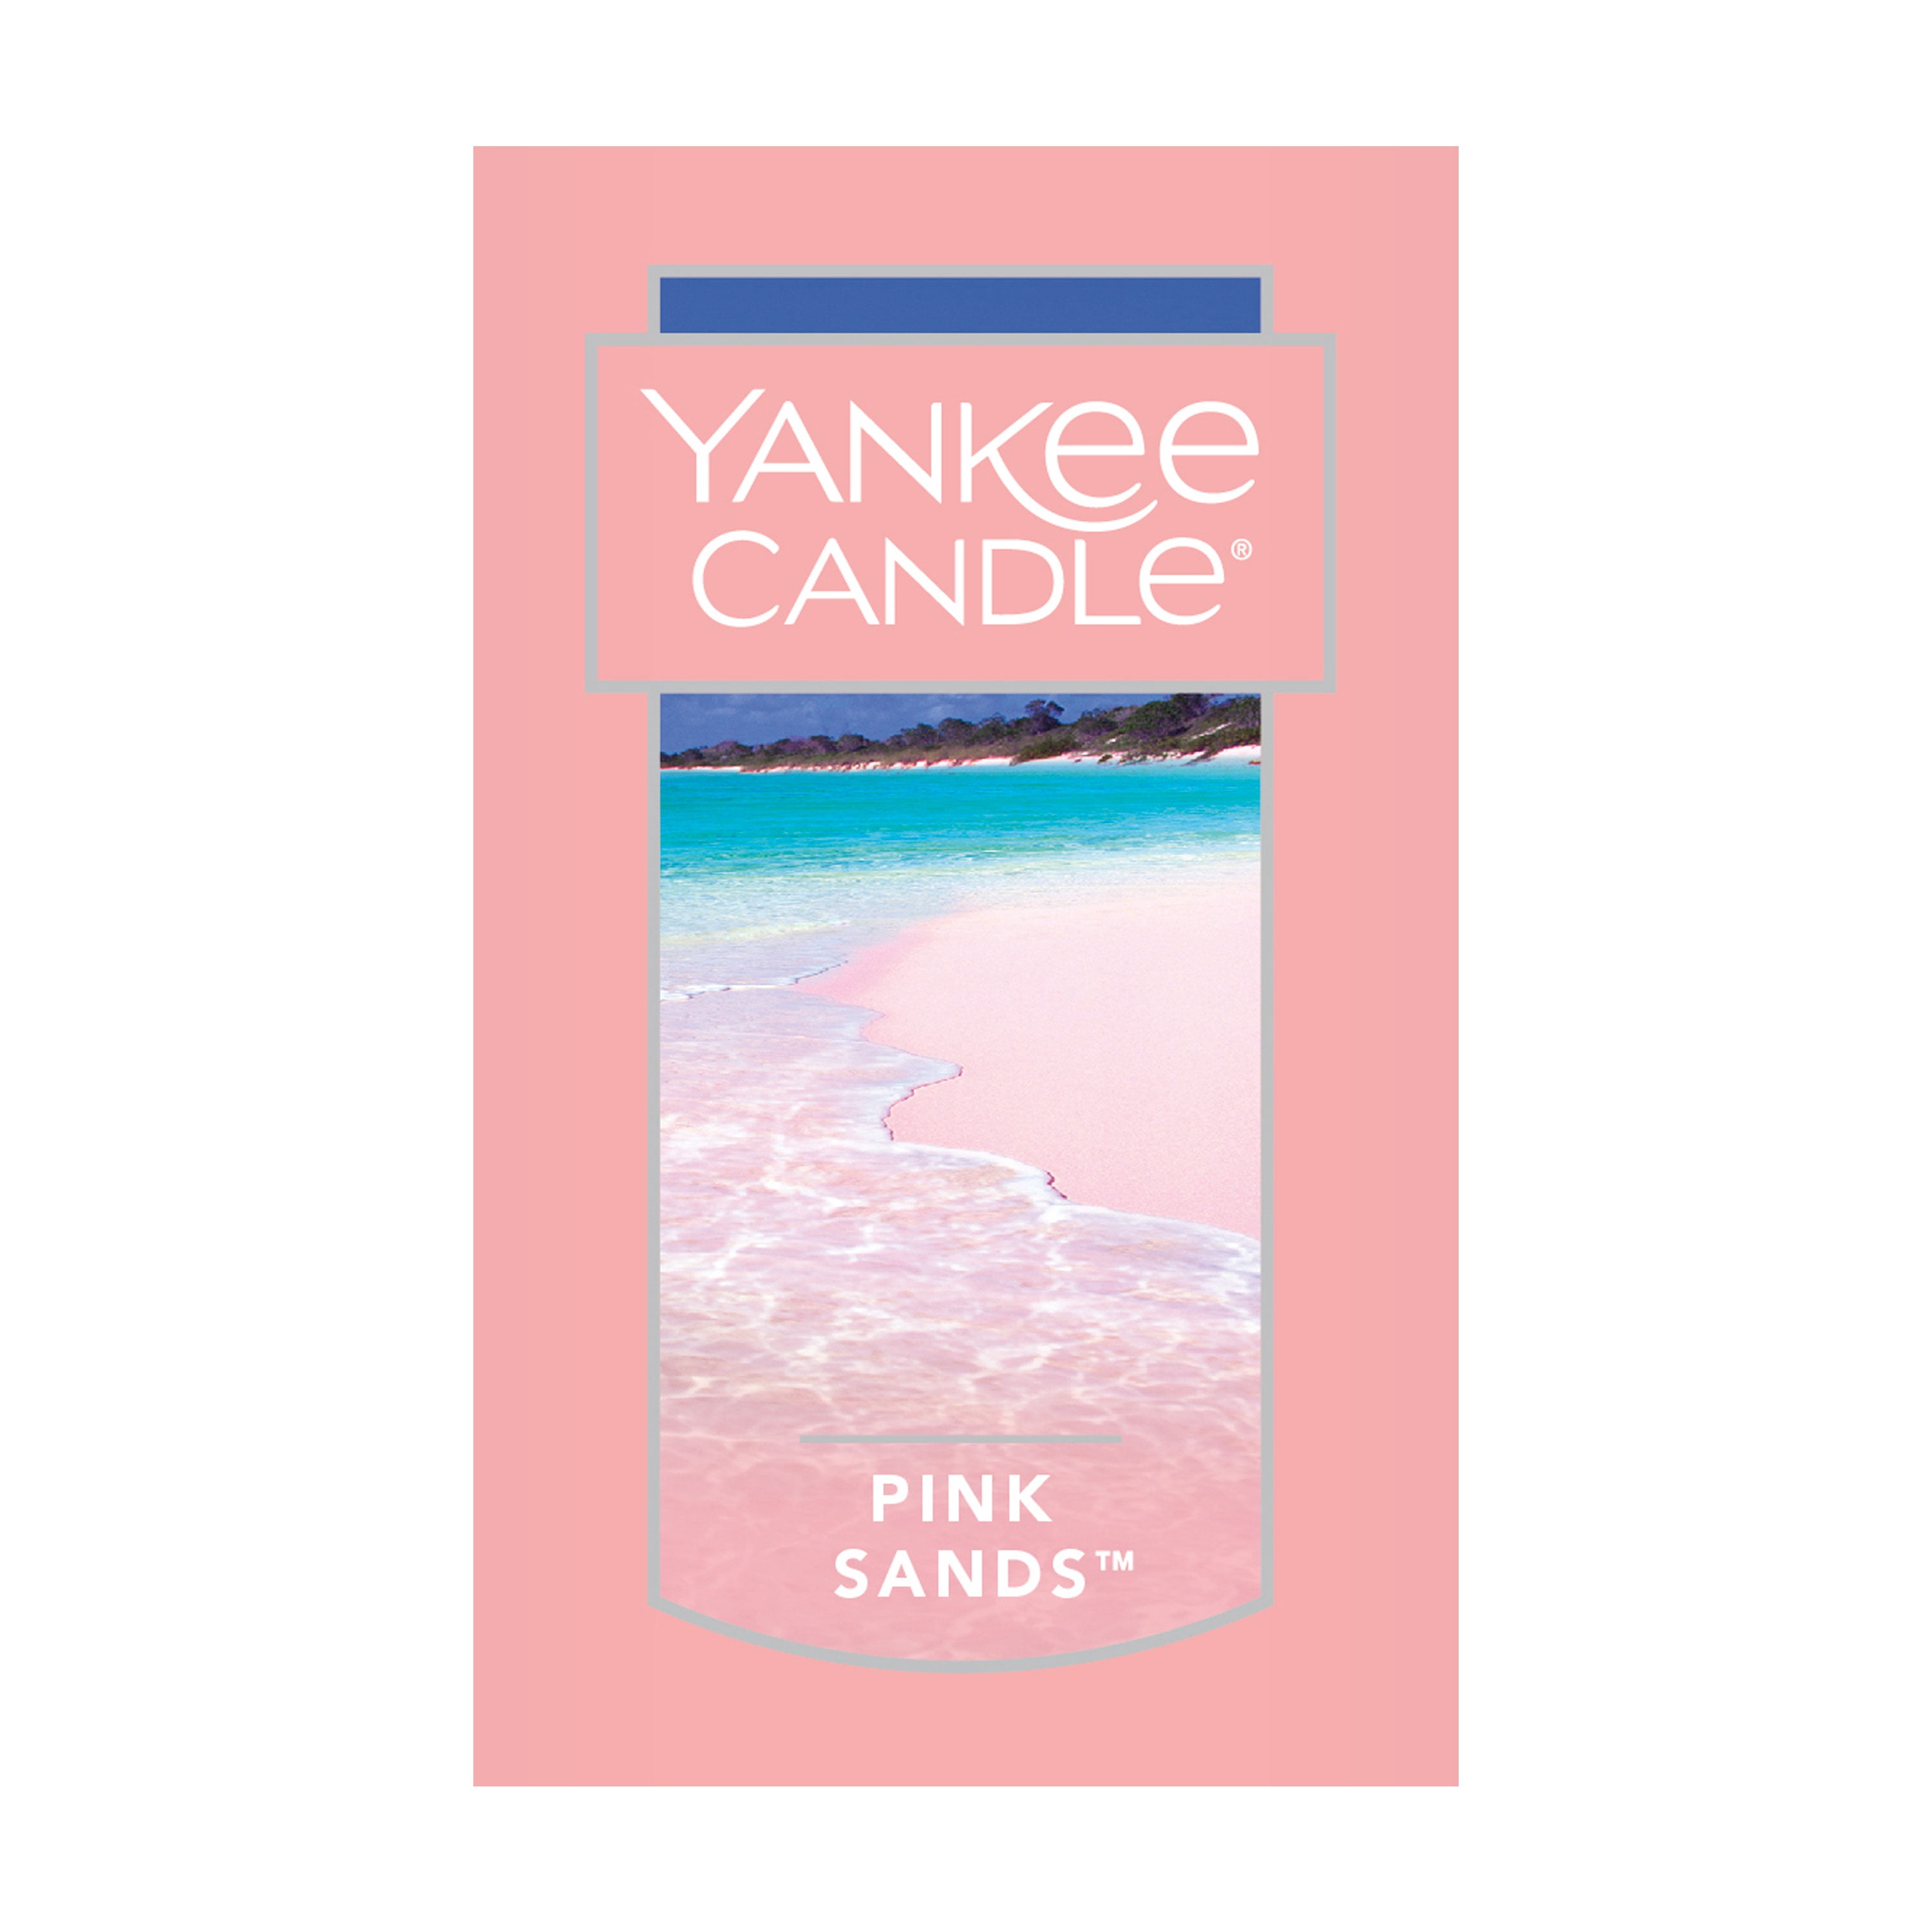 Dropship YANKEE CANDLE By Yankee Candle PINK SANDS CAR JAR AIR FRESHENER to  Sell Online at a Lower Price